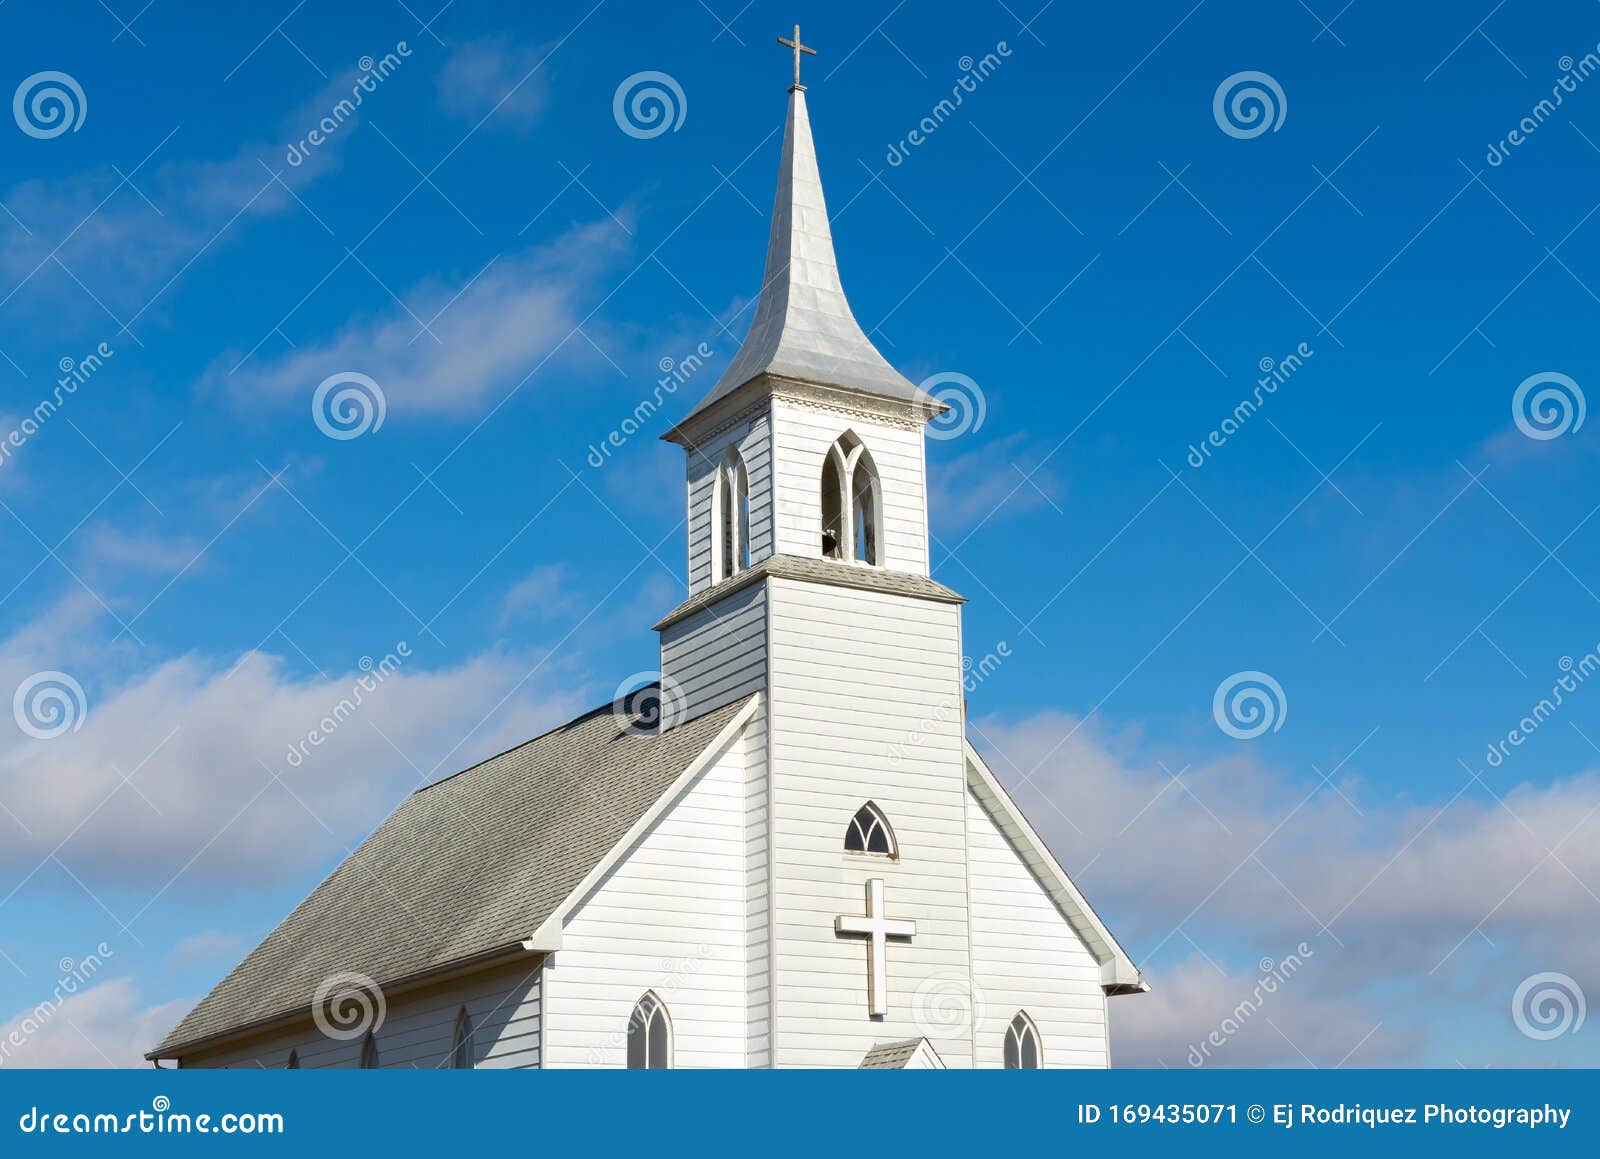 Church in the Midwest stock image. Image of heaven, christian - 169435071